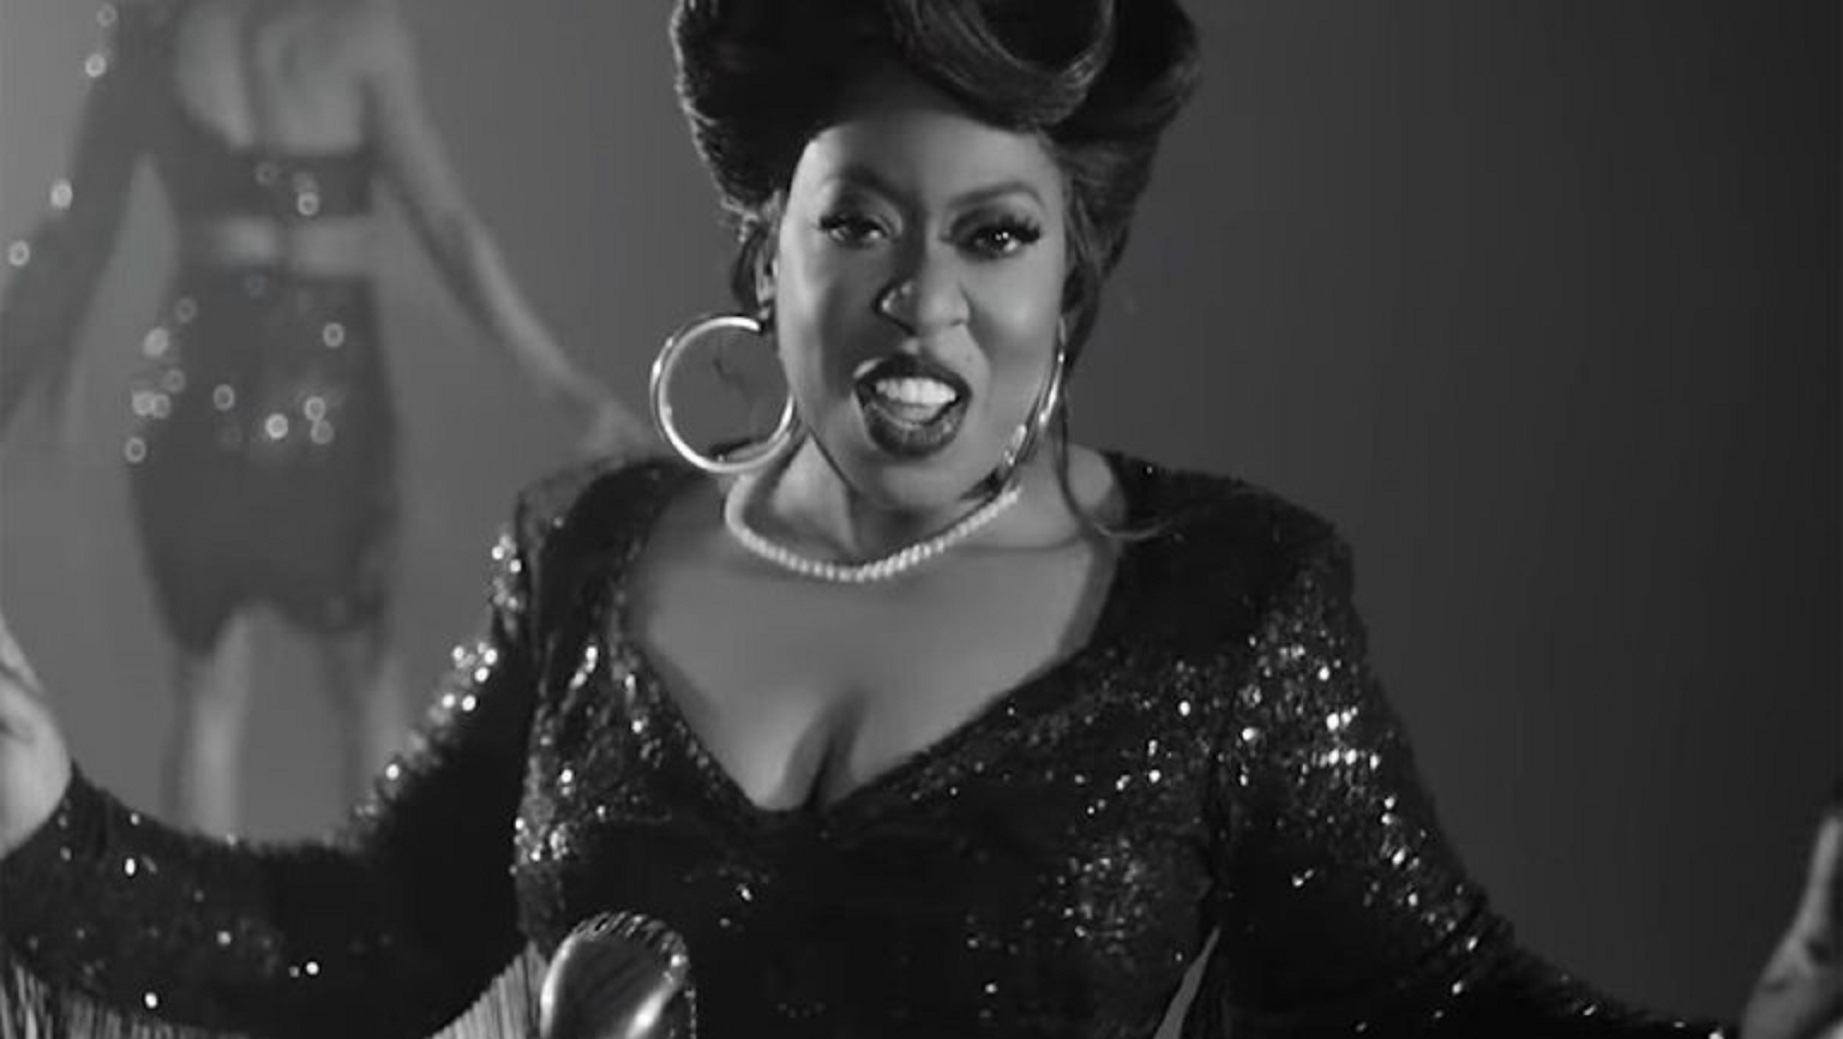 Watch Music Video For Missy Elliott’s New Song ‘Why I Still Love You